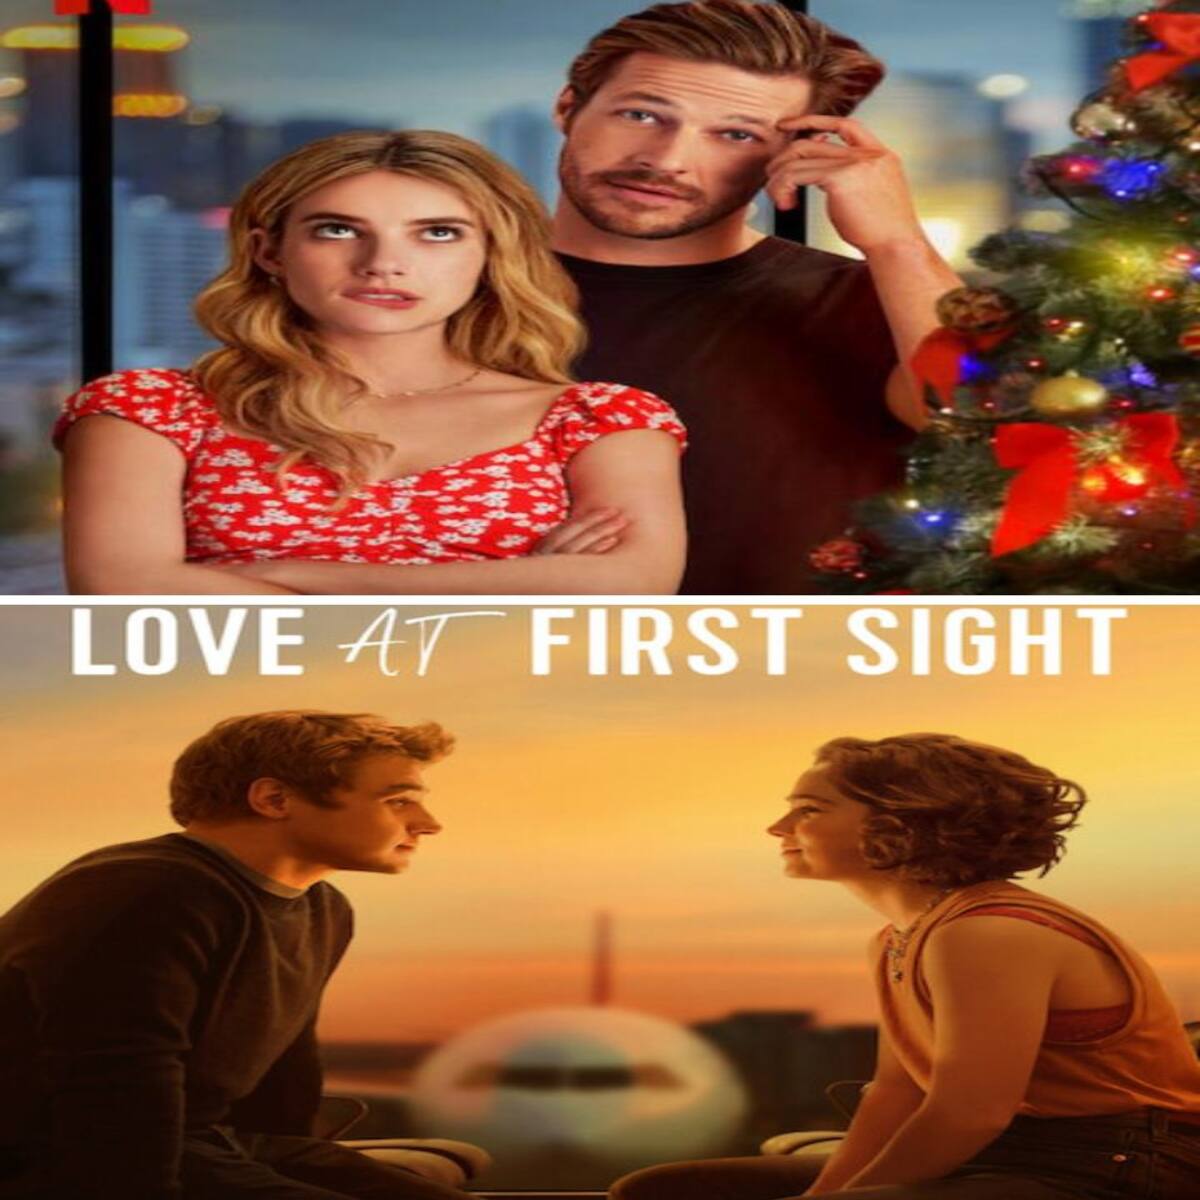 Love at First Sight, Official Trailer